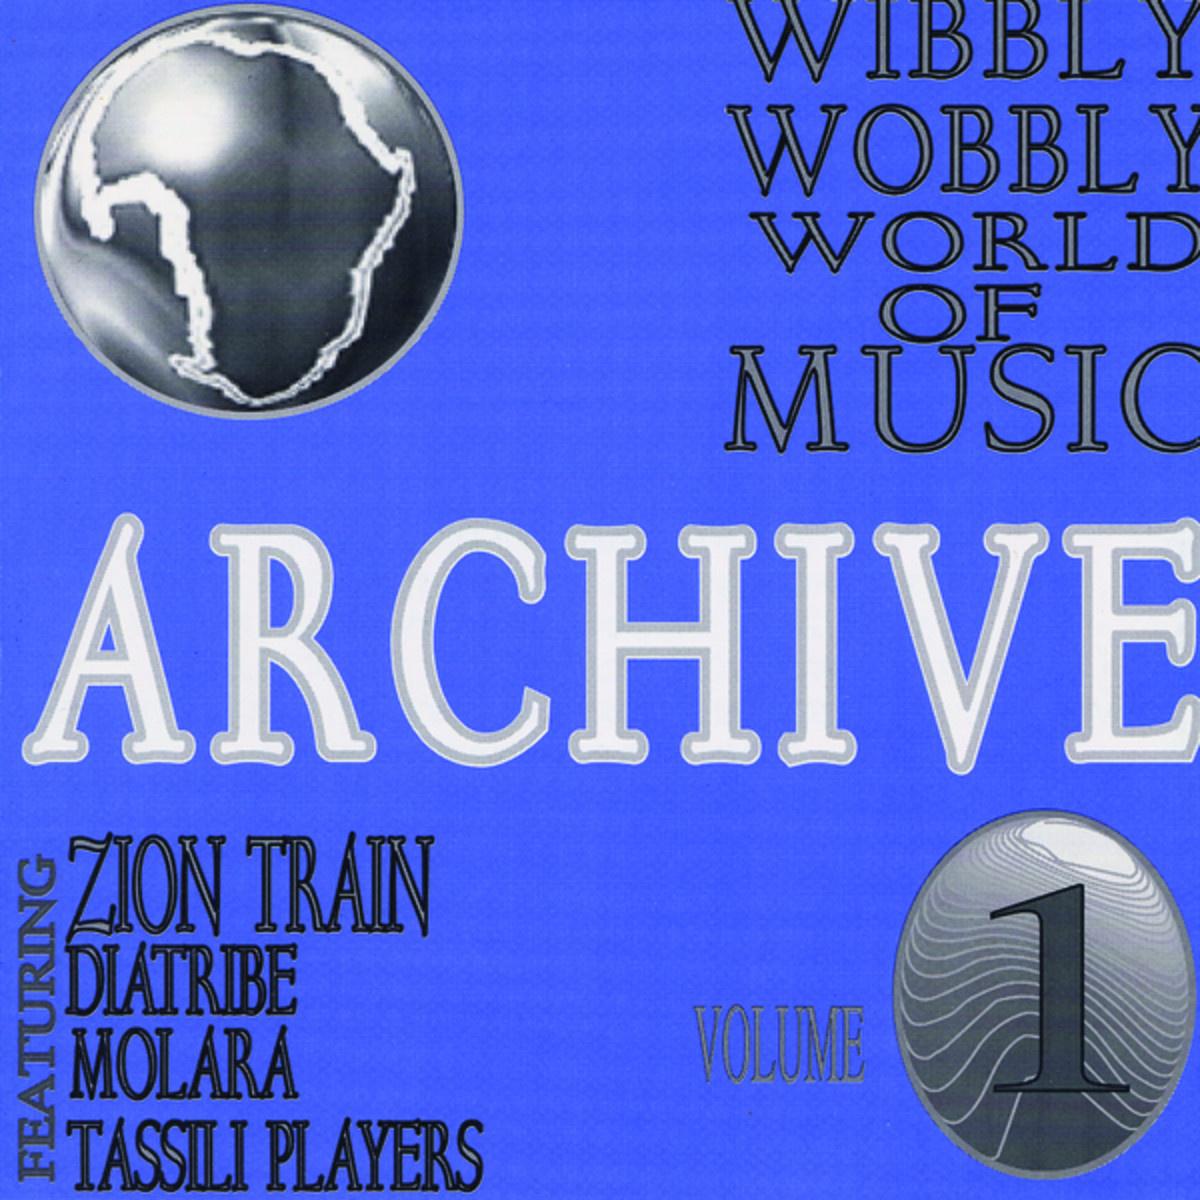 Wibbly Wobbly World Of Music Archive Vol. 1专辑